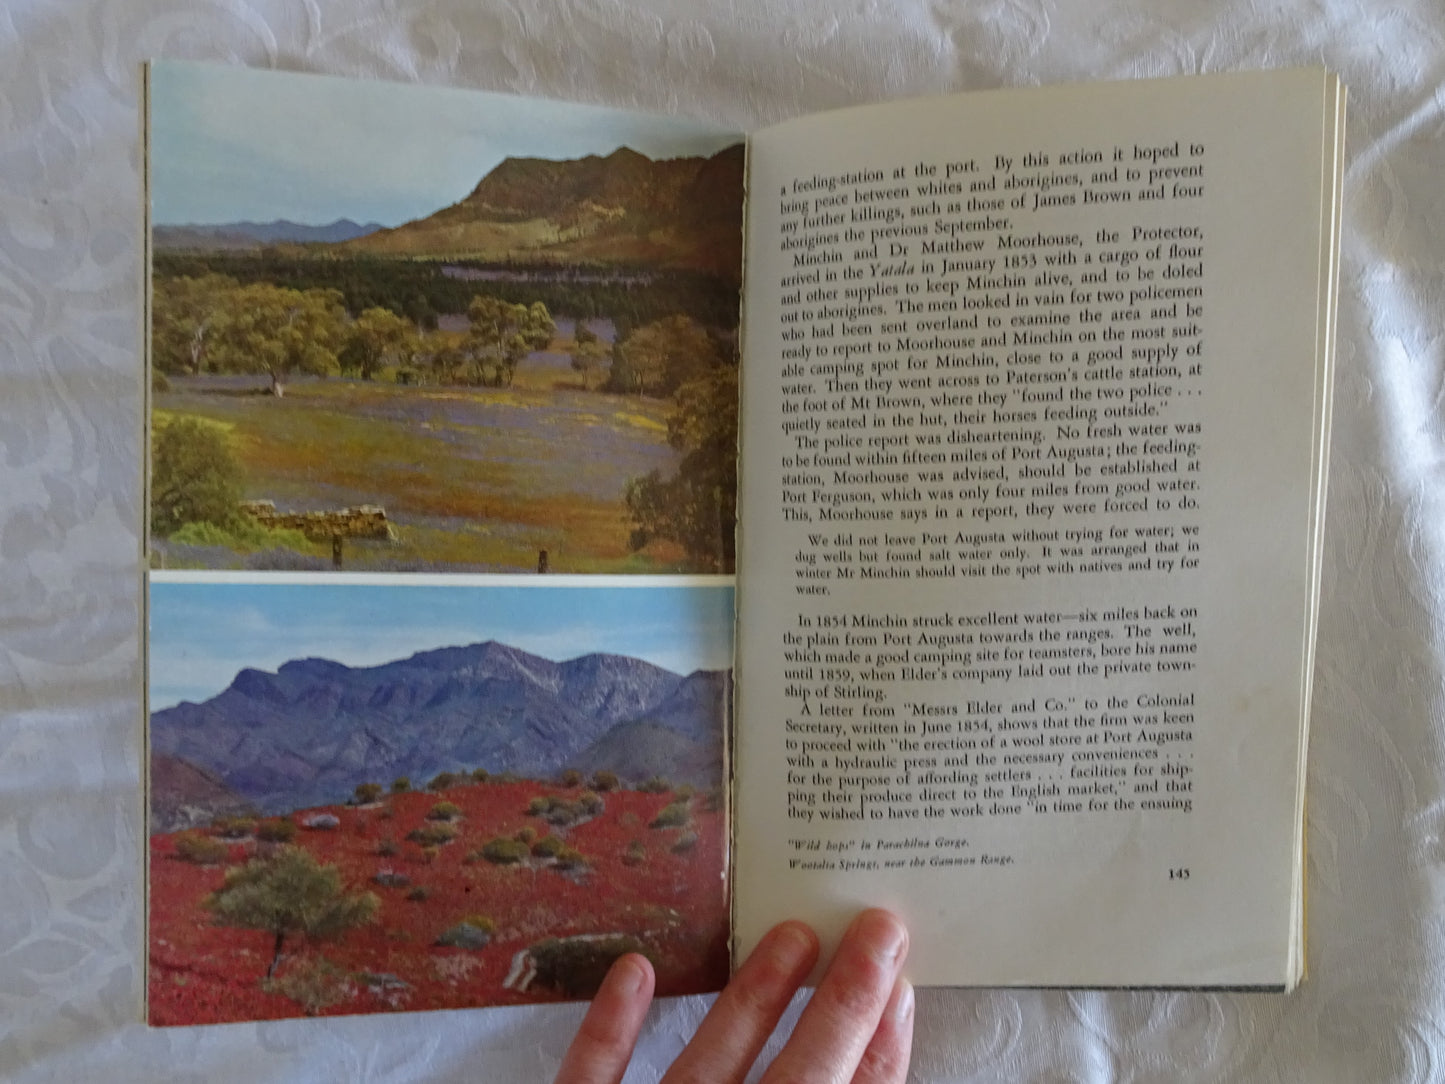 The Story of the Flinders Ranges by Hans Mincham